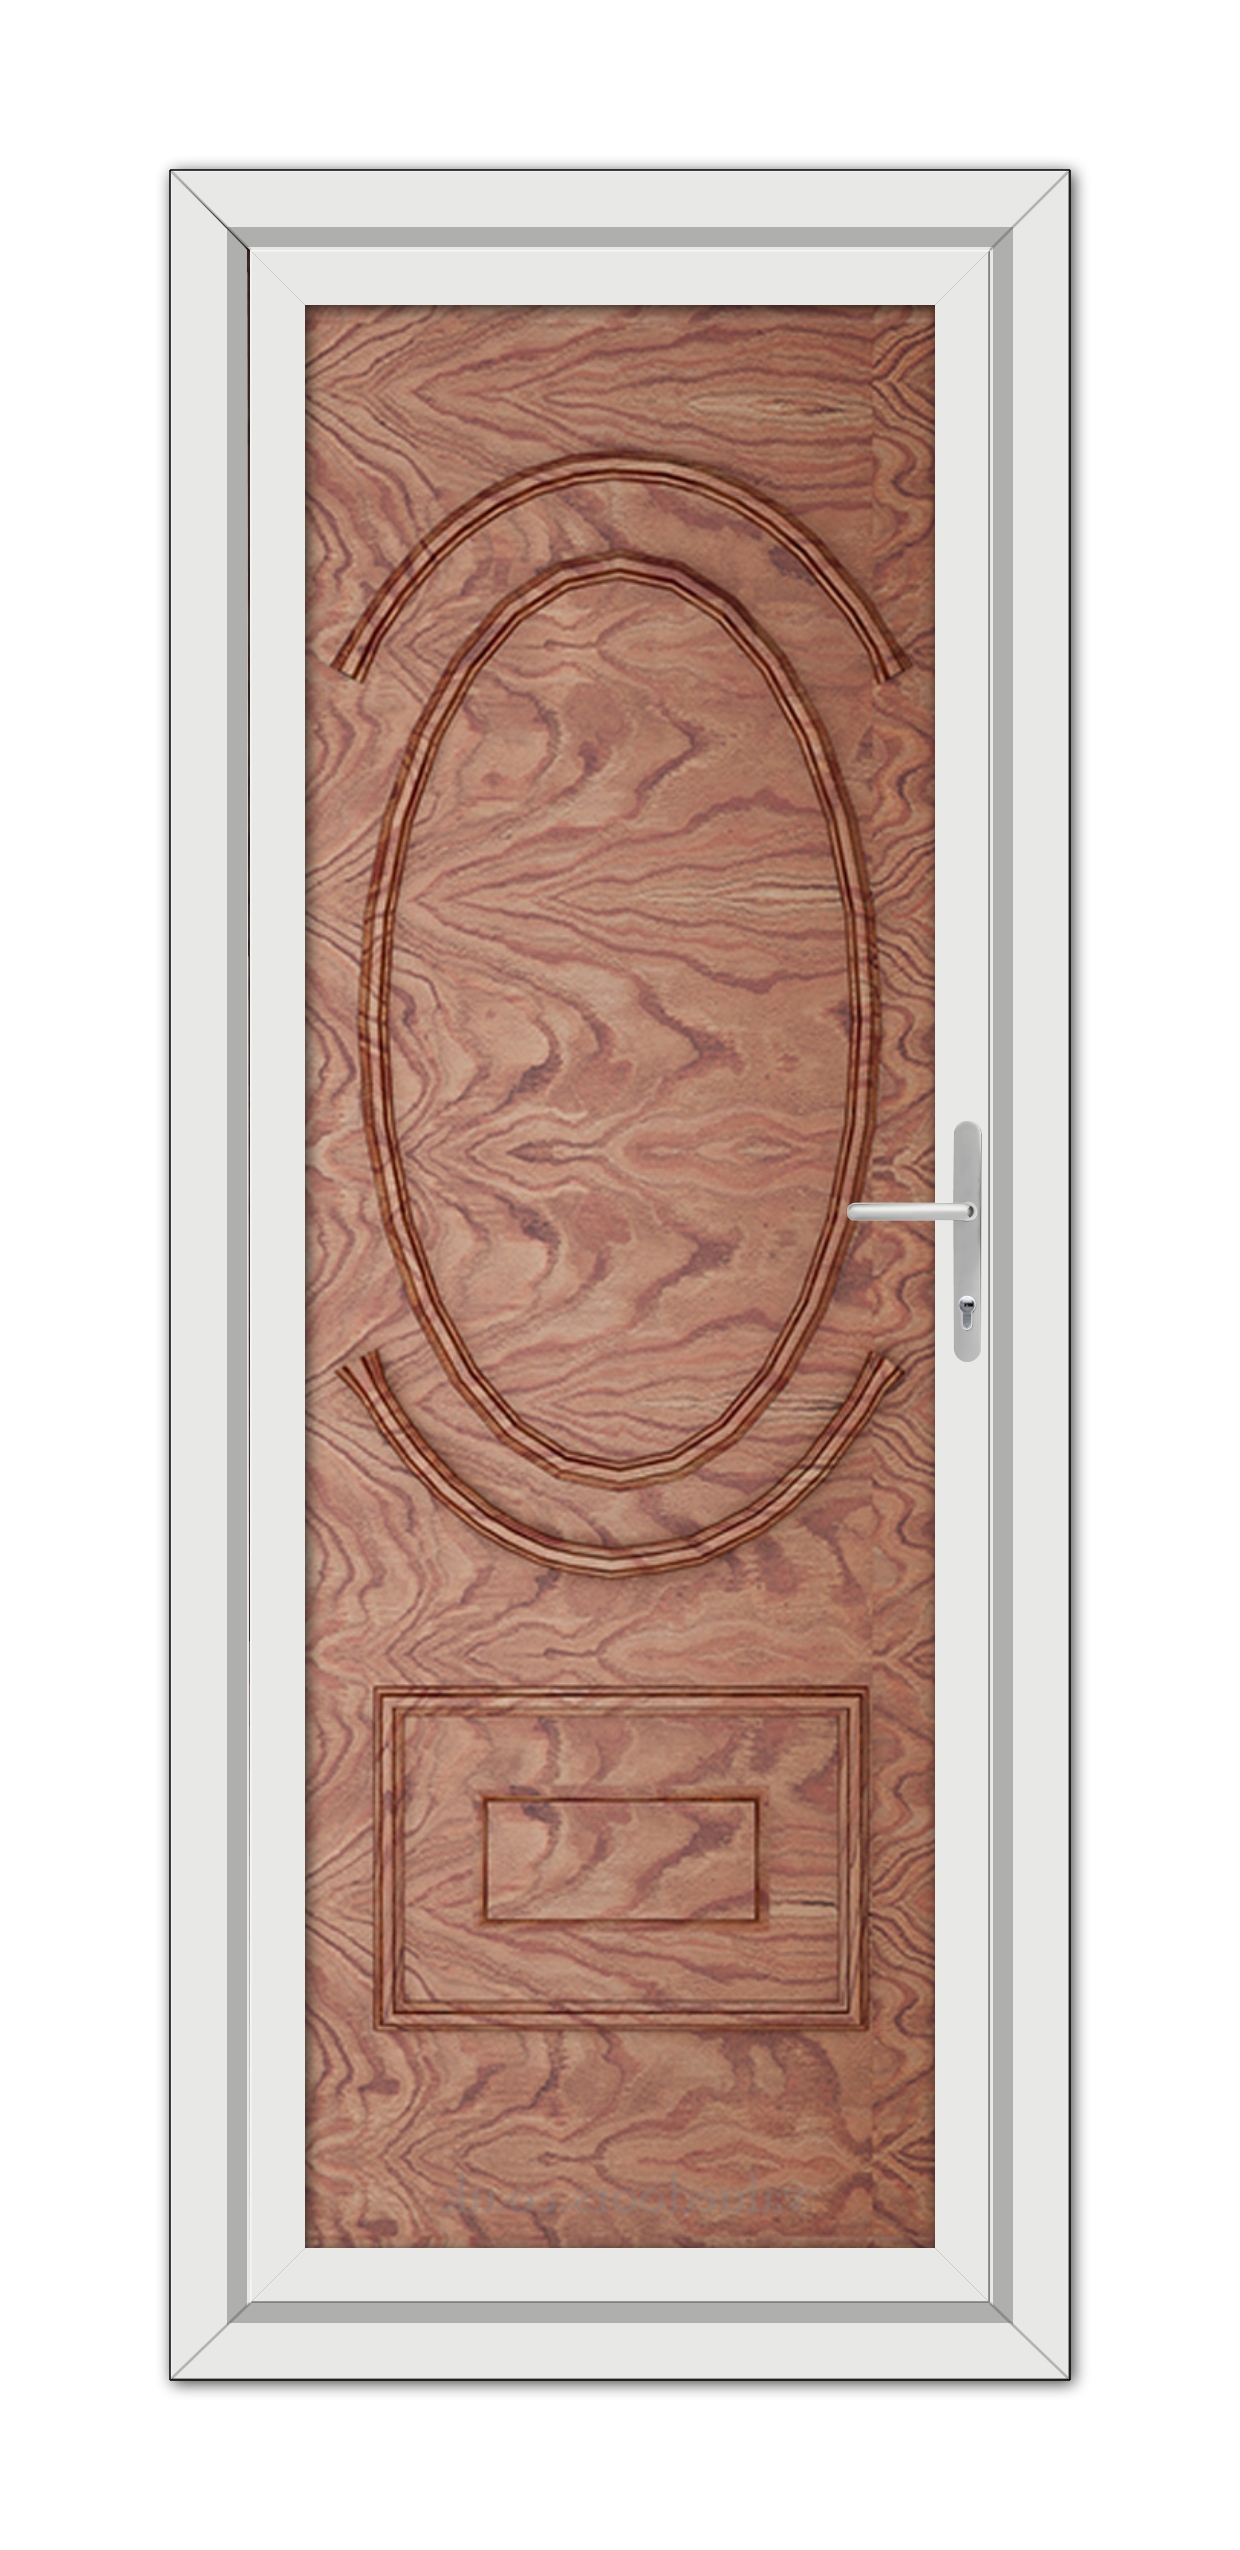 A Solid Oak Richmond door with an oval relief design and a metal handle, surrounded by a simple white frame.